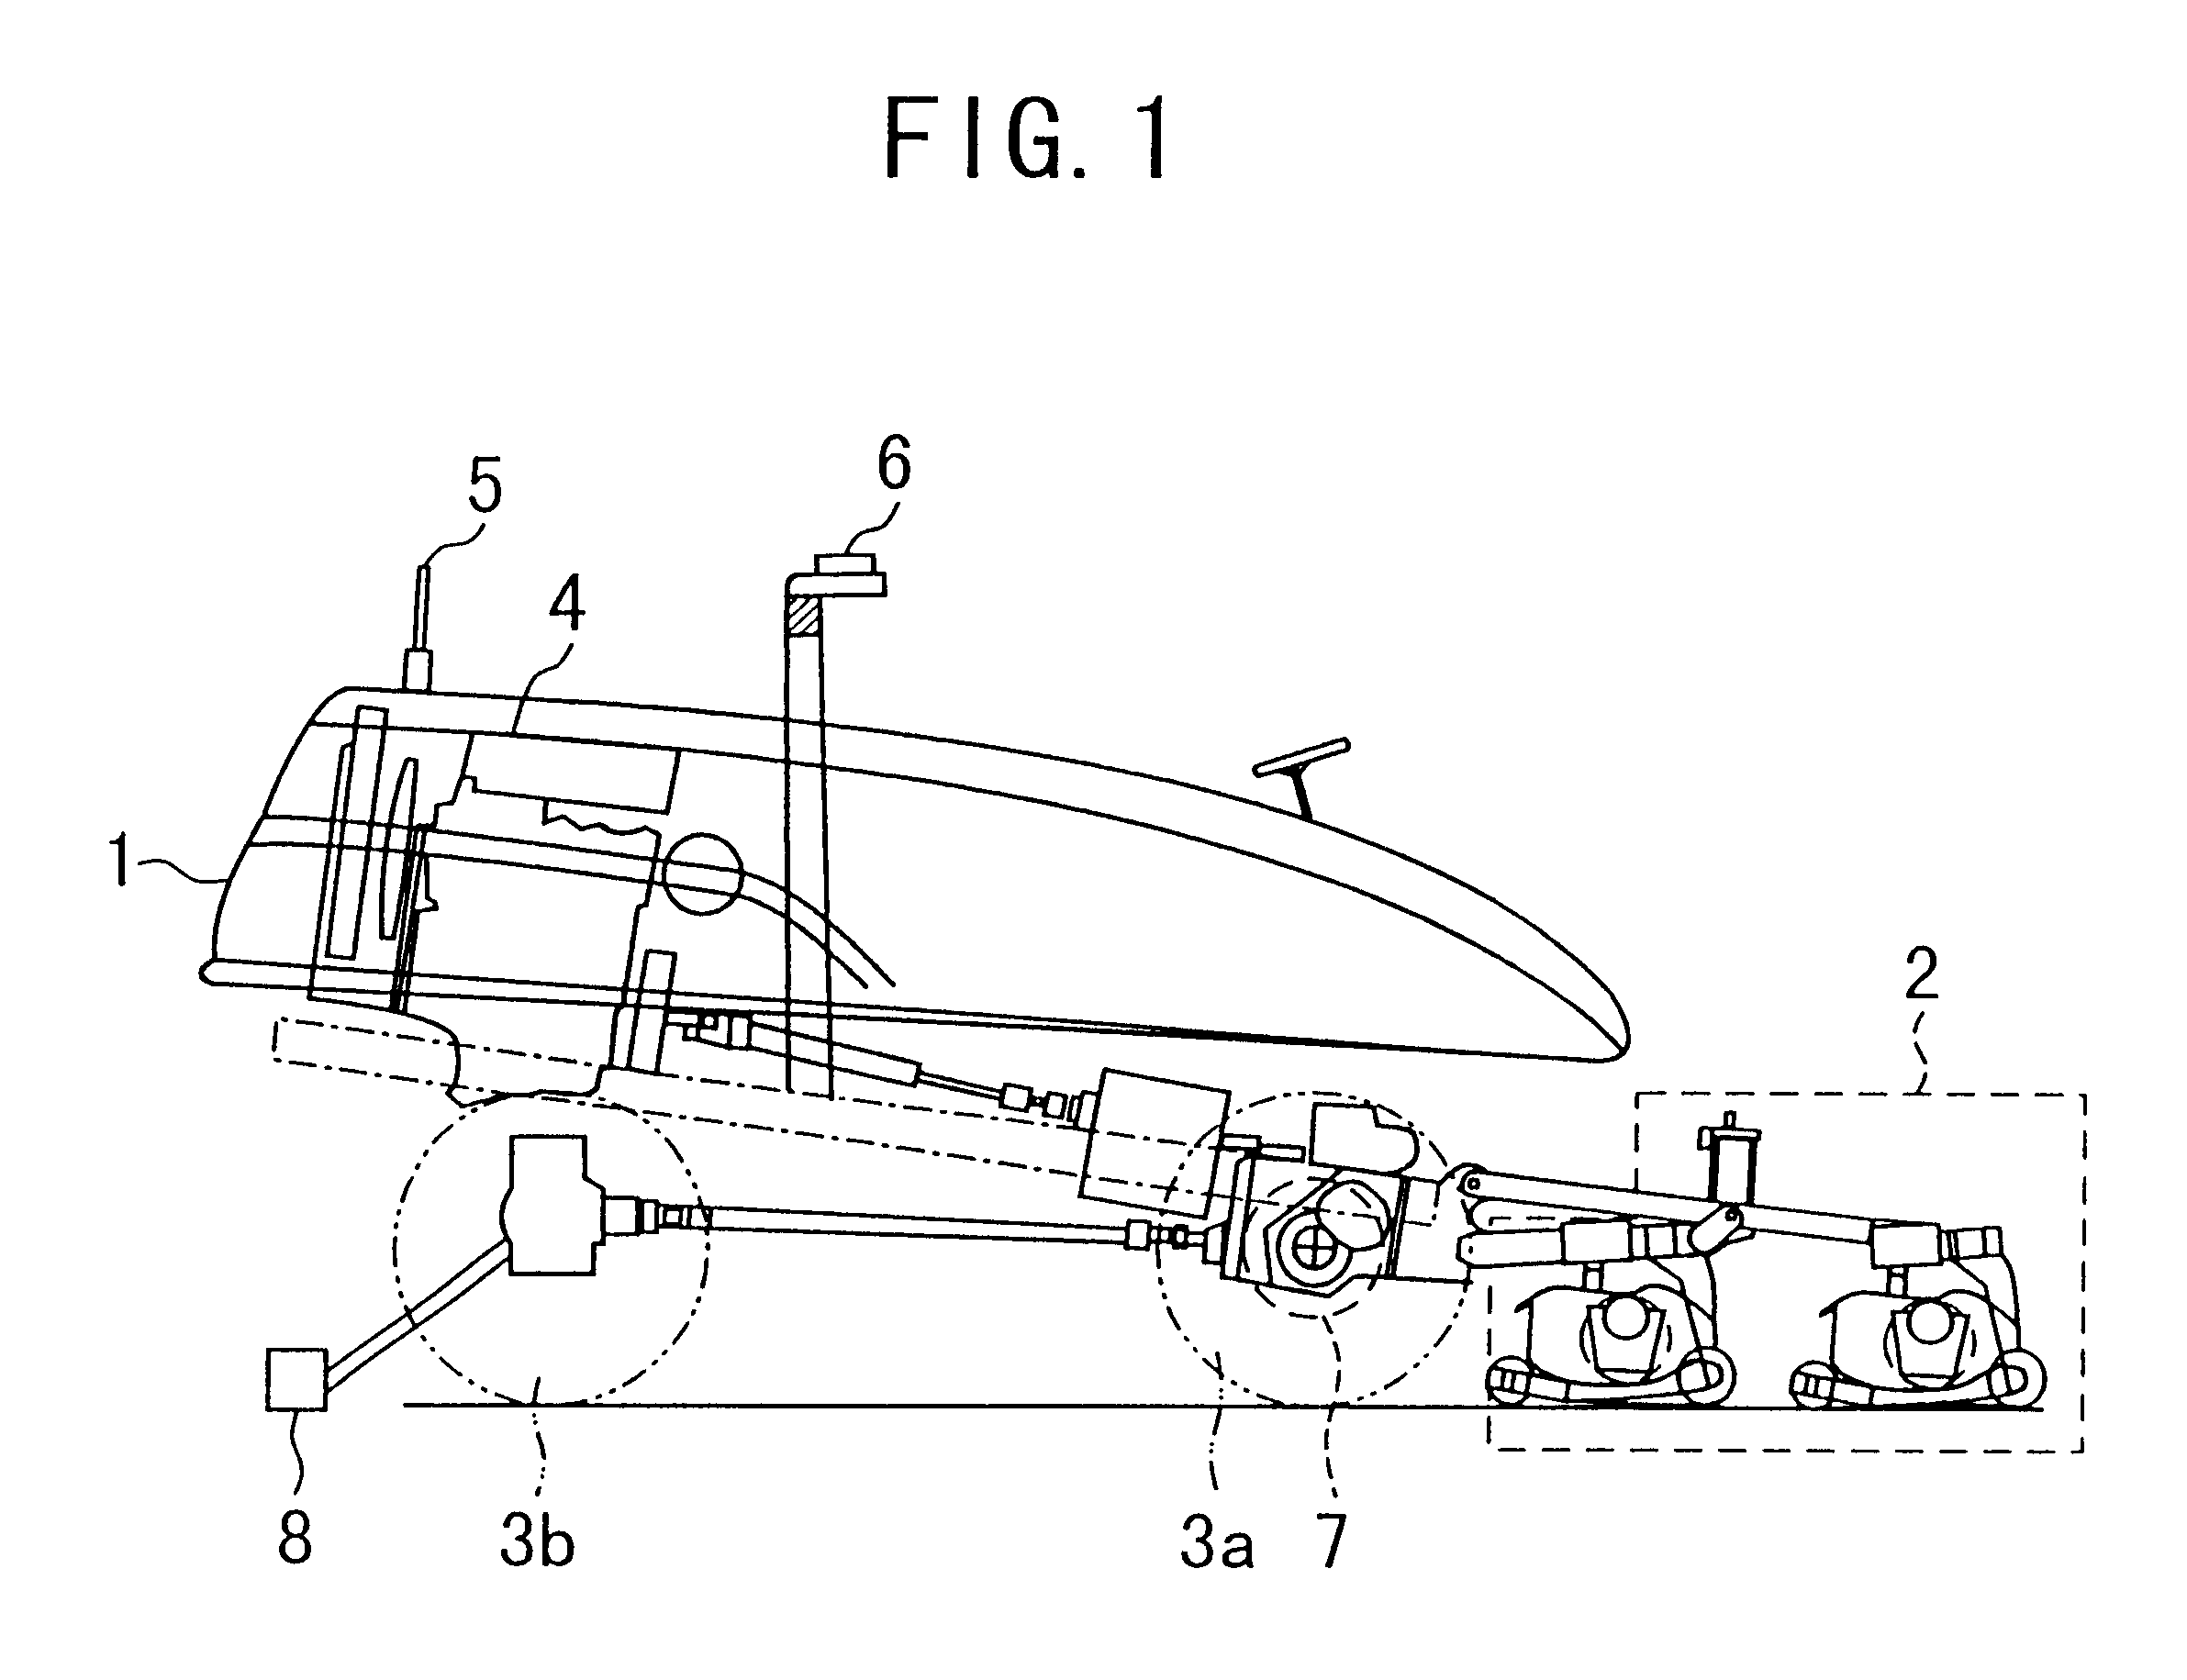 Apparatus and method for guiding vehicle autonomously